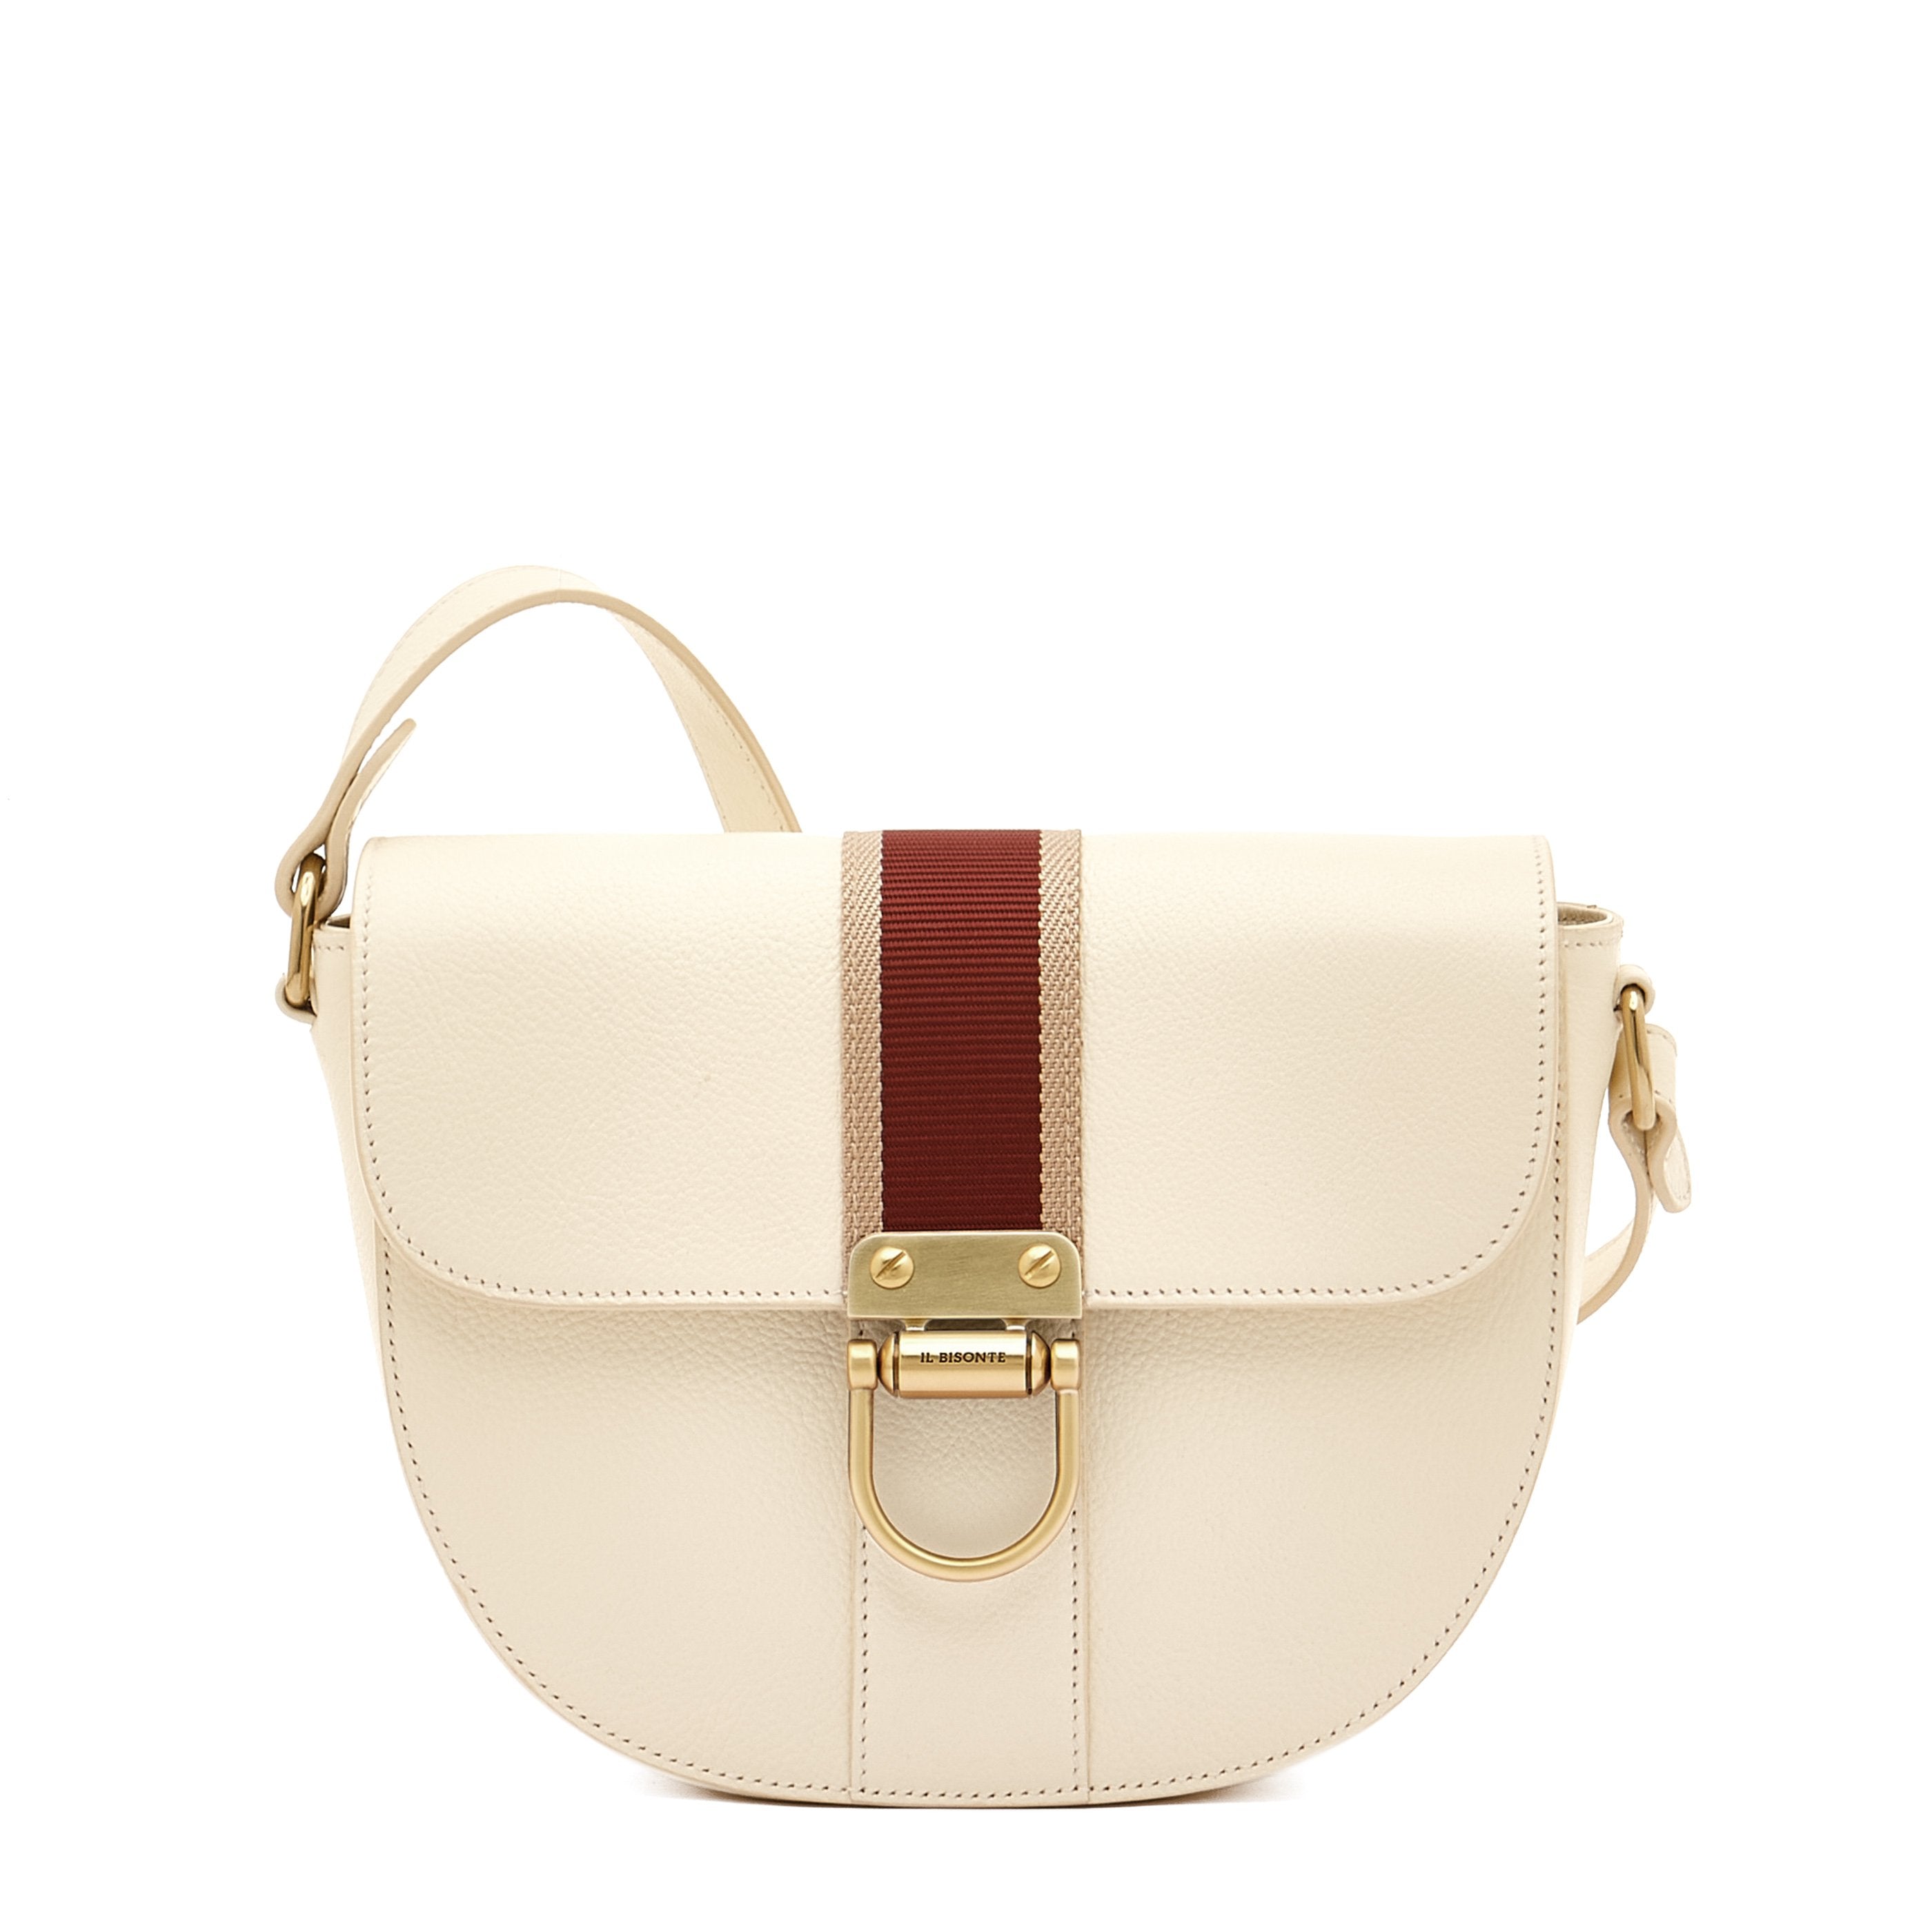 Solaria | Women's crossbody bag in leather color white